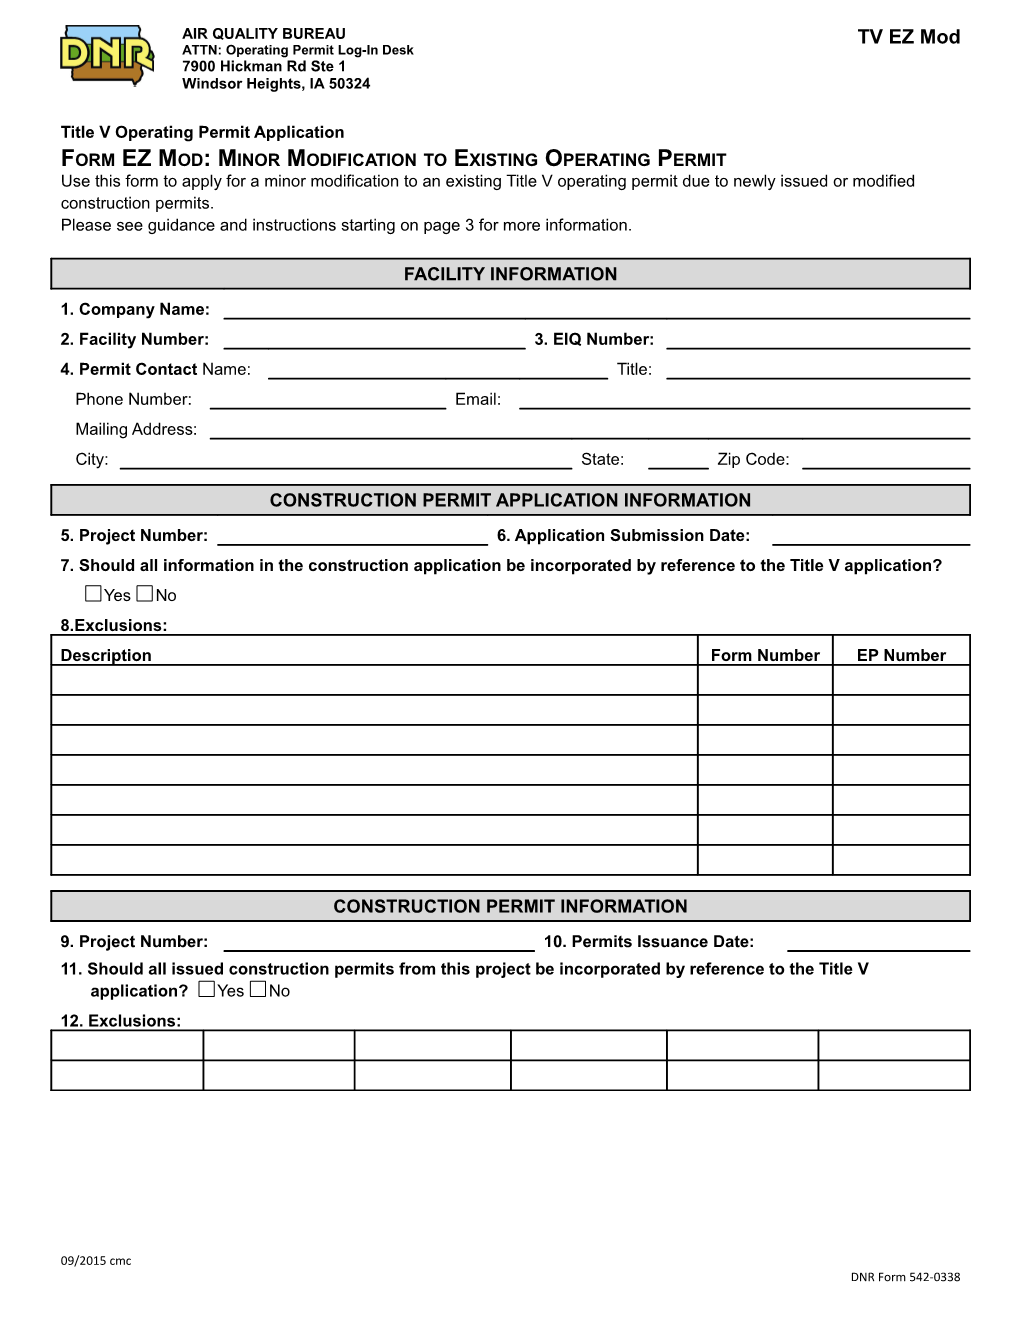 Title V Operating Permit Application